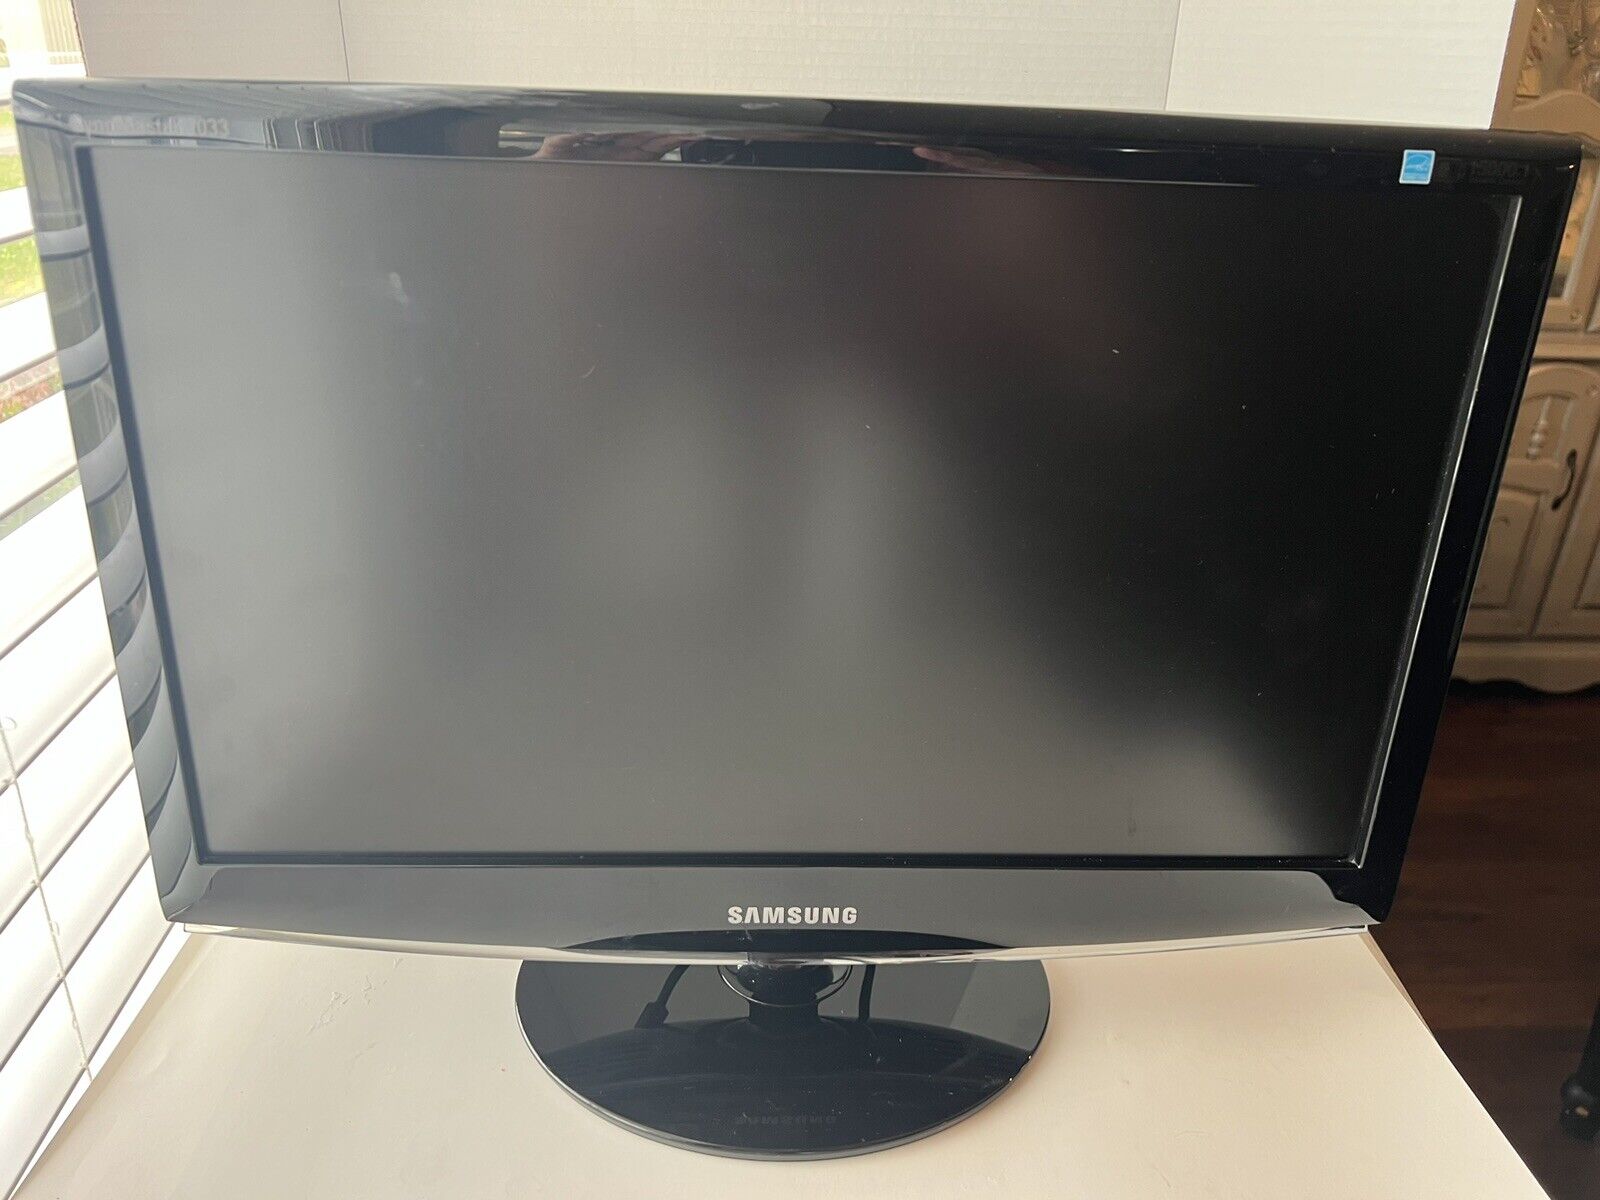 Samsung Syncmaster 2033SW 20-in Widescreen LCD Monitor Good Working Condition